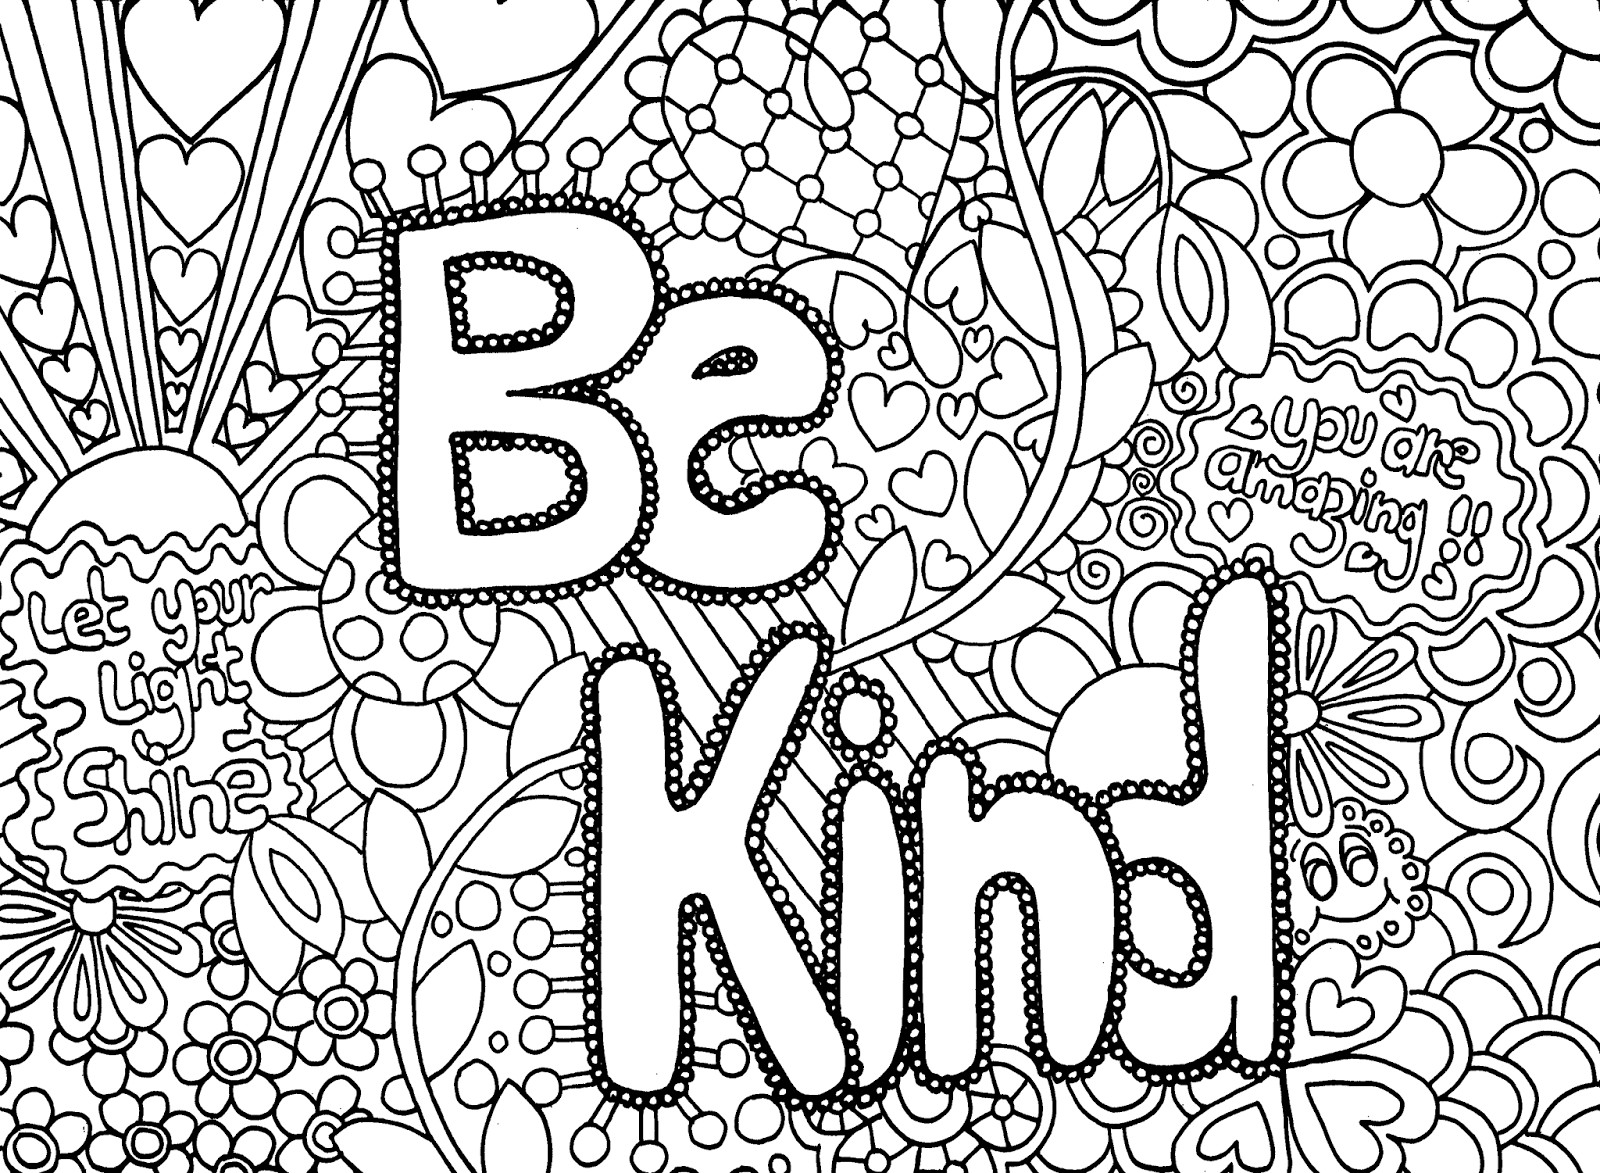 Kindness Coloring Pages - Best Coloring Pages For Kids